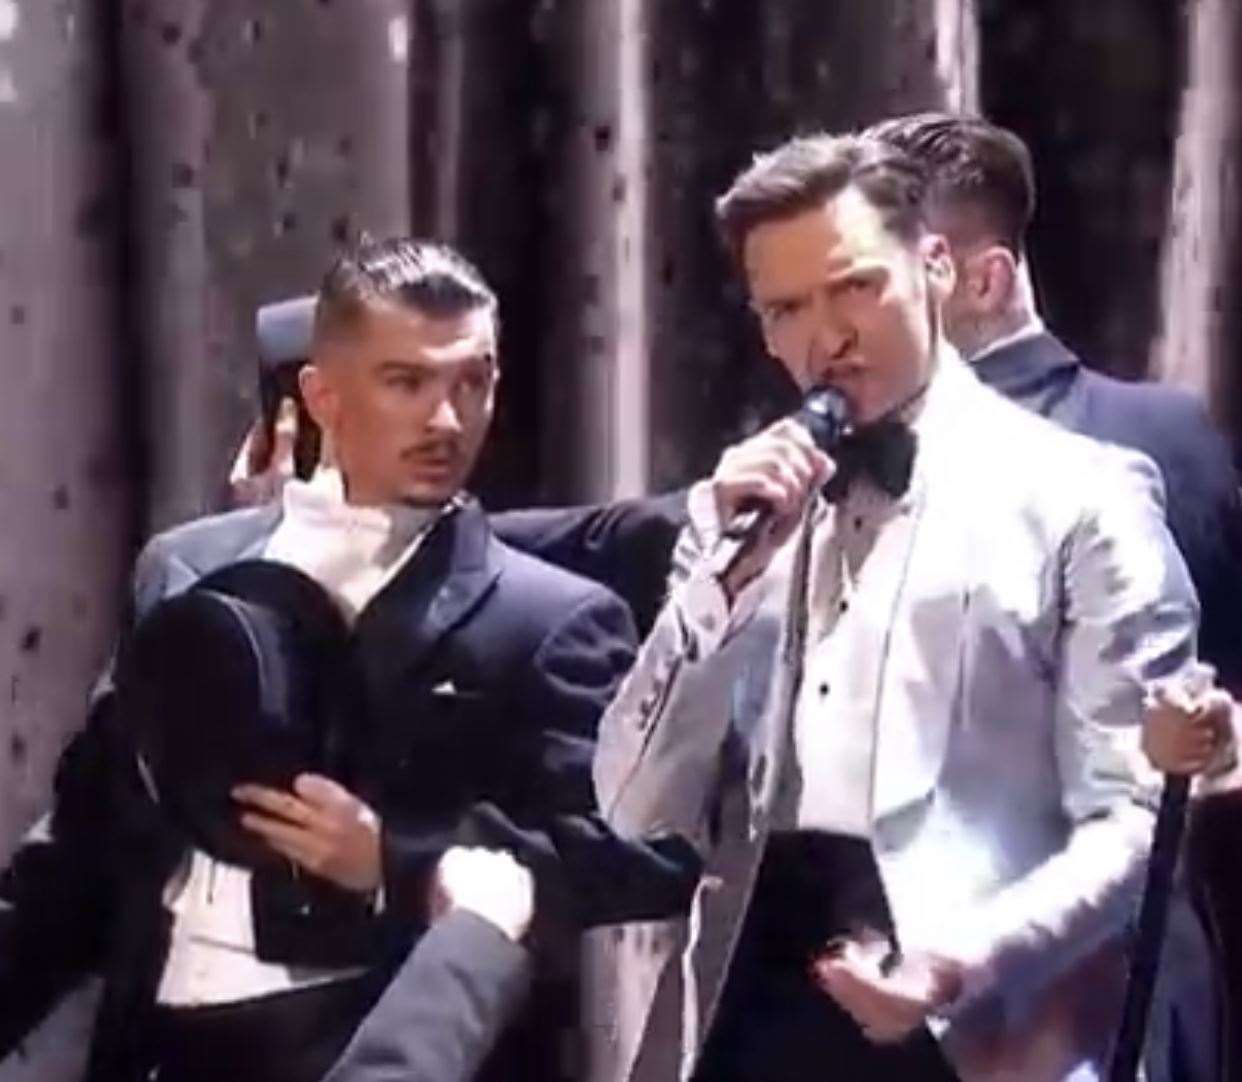 Billy performing alongside The Greatest Showman star Hugh Jackman at The Brit Awards